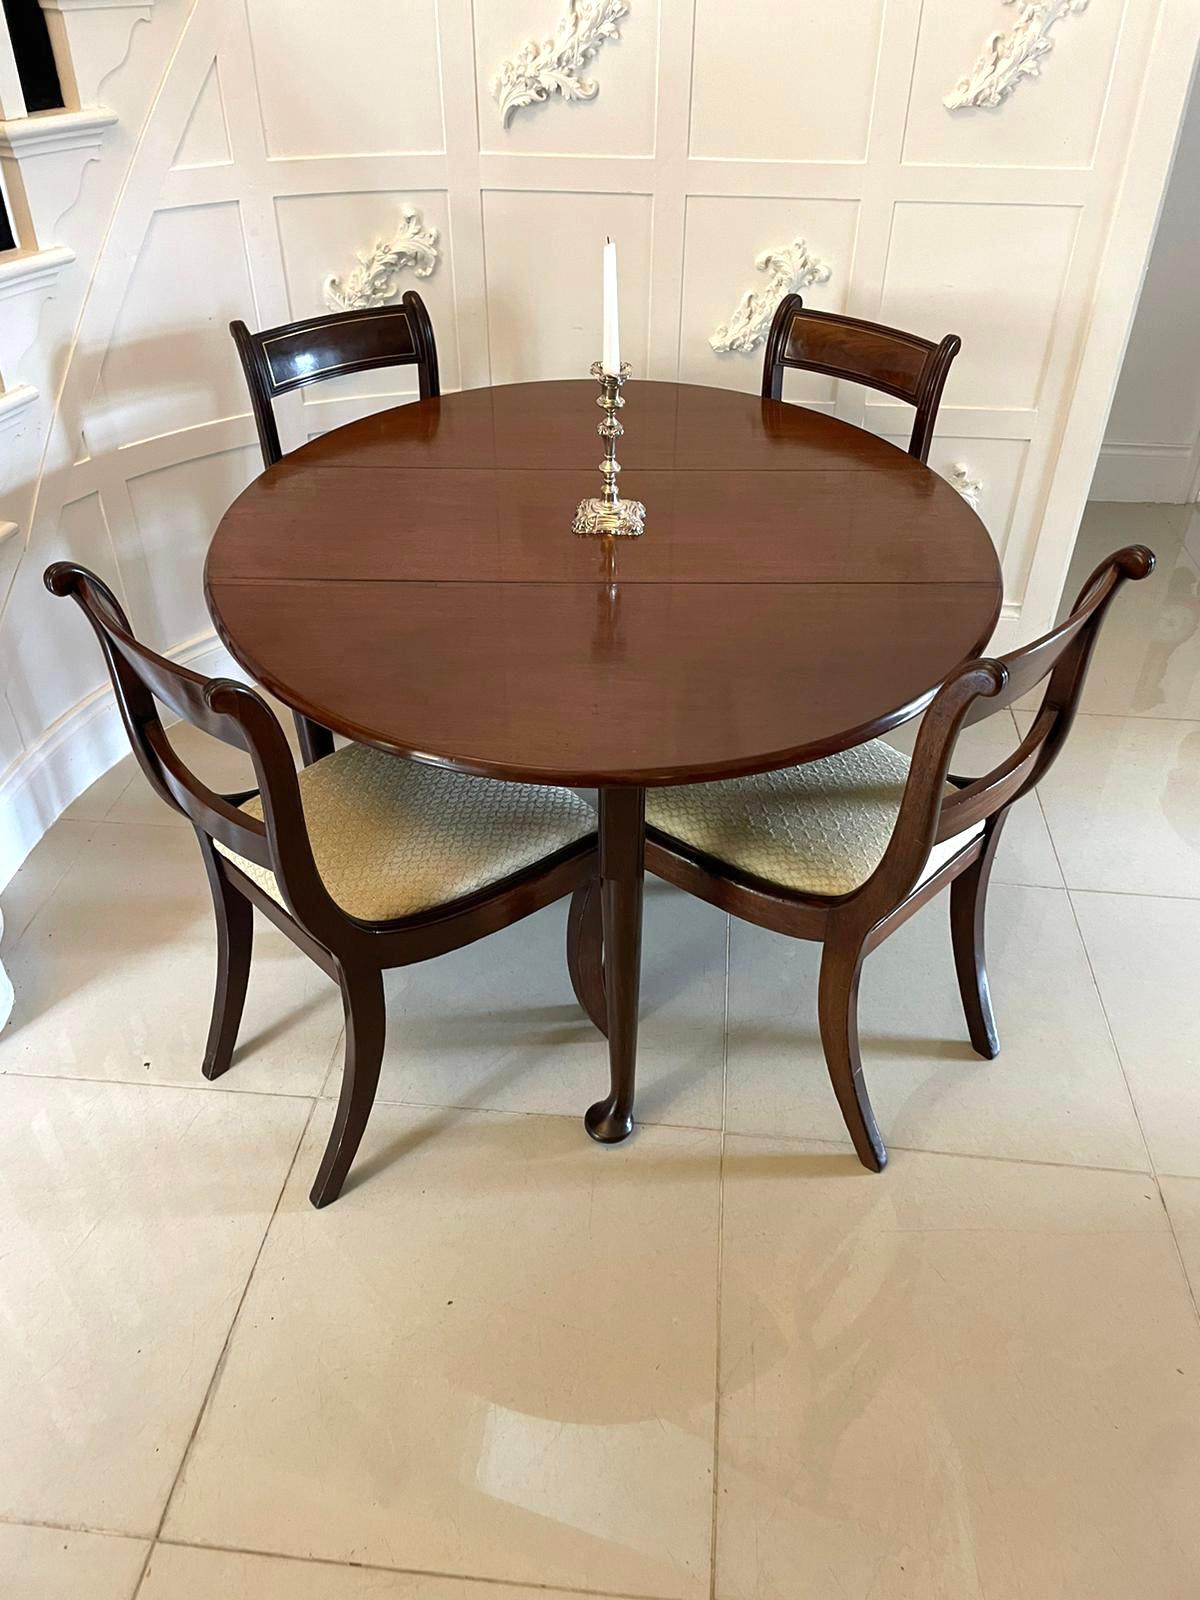 Antique George III quality mahogany dining/centre table having a quality mahogany top with two drop leaves, swing out gateleg action for support standing on turned tapering legs with pad feet

A handsome all original 18th century example boasting